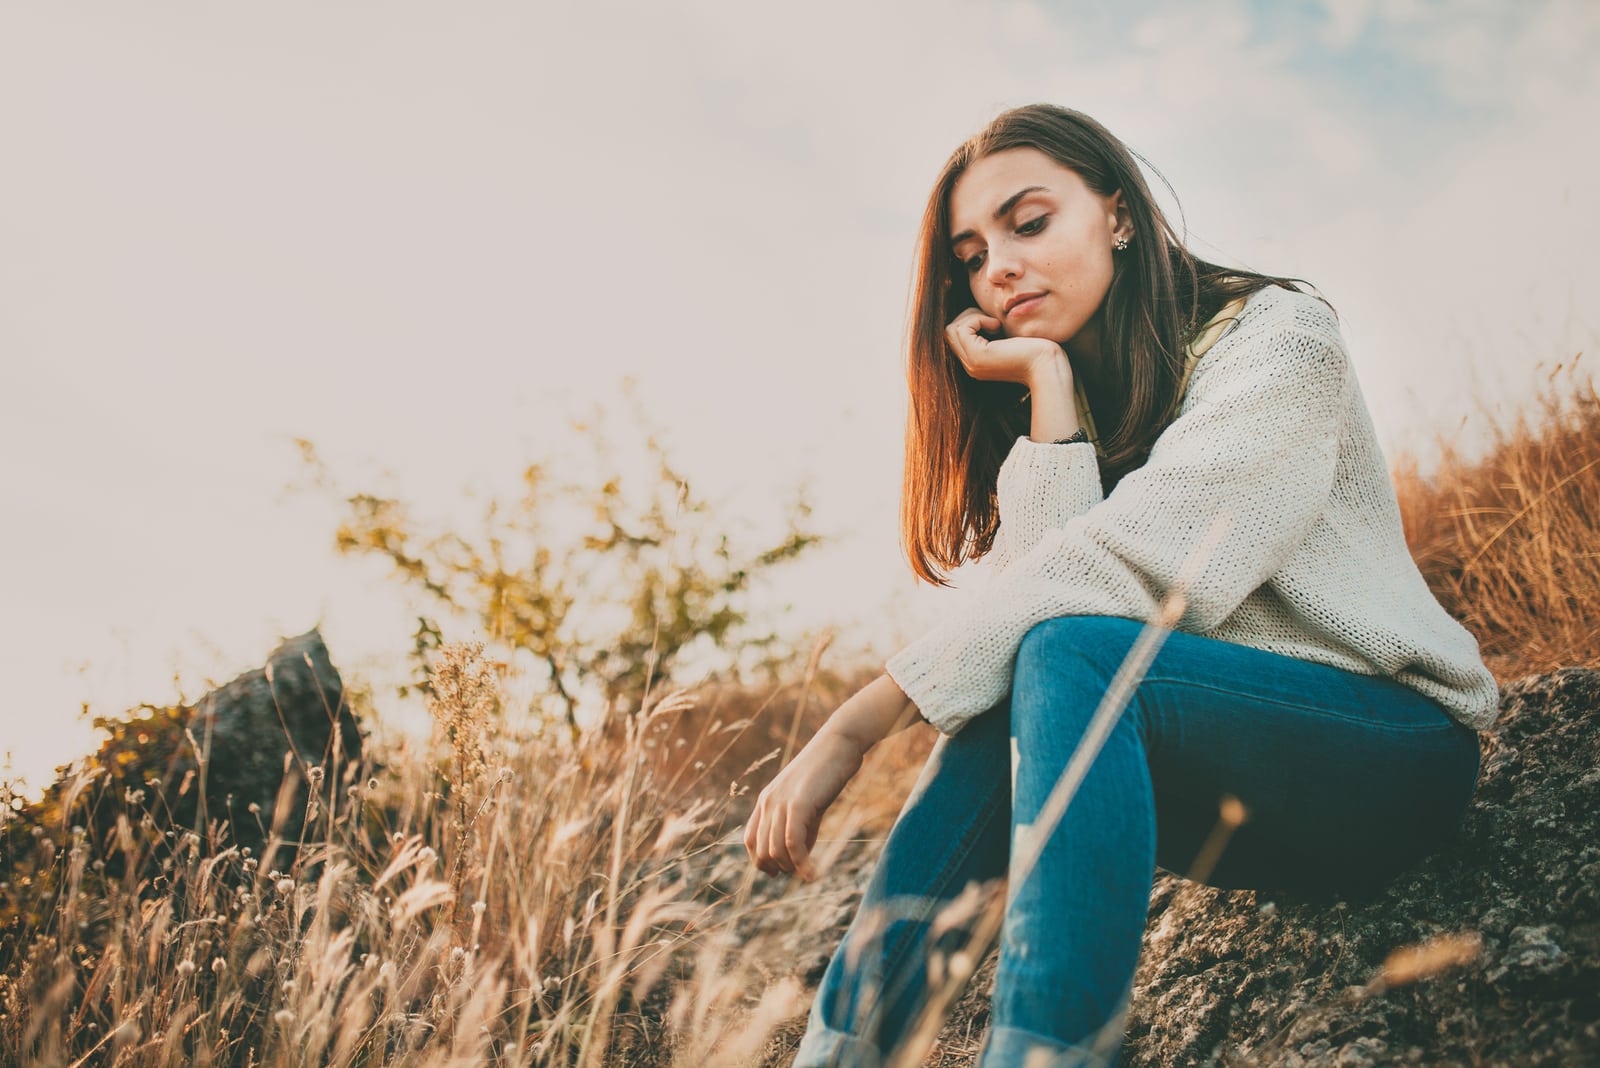 mindful young woman sitting outdoor in nature